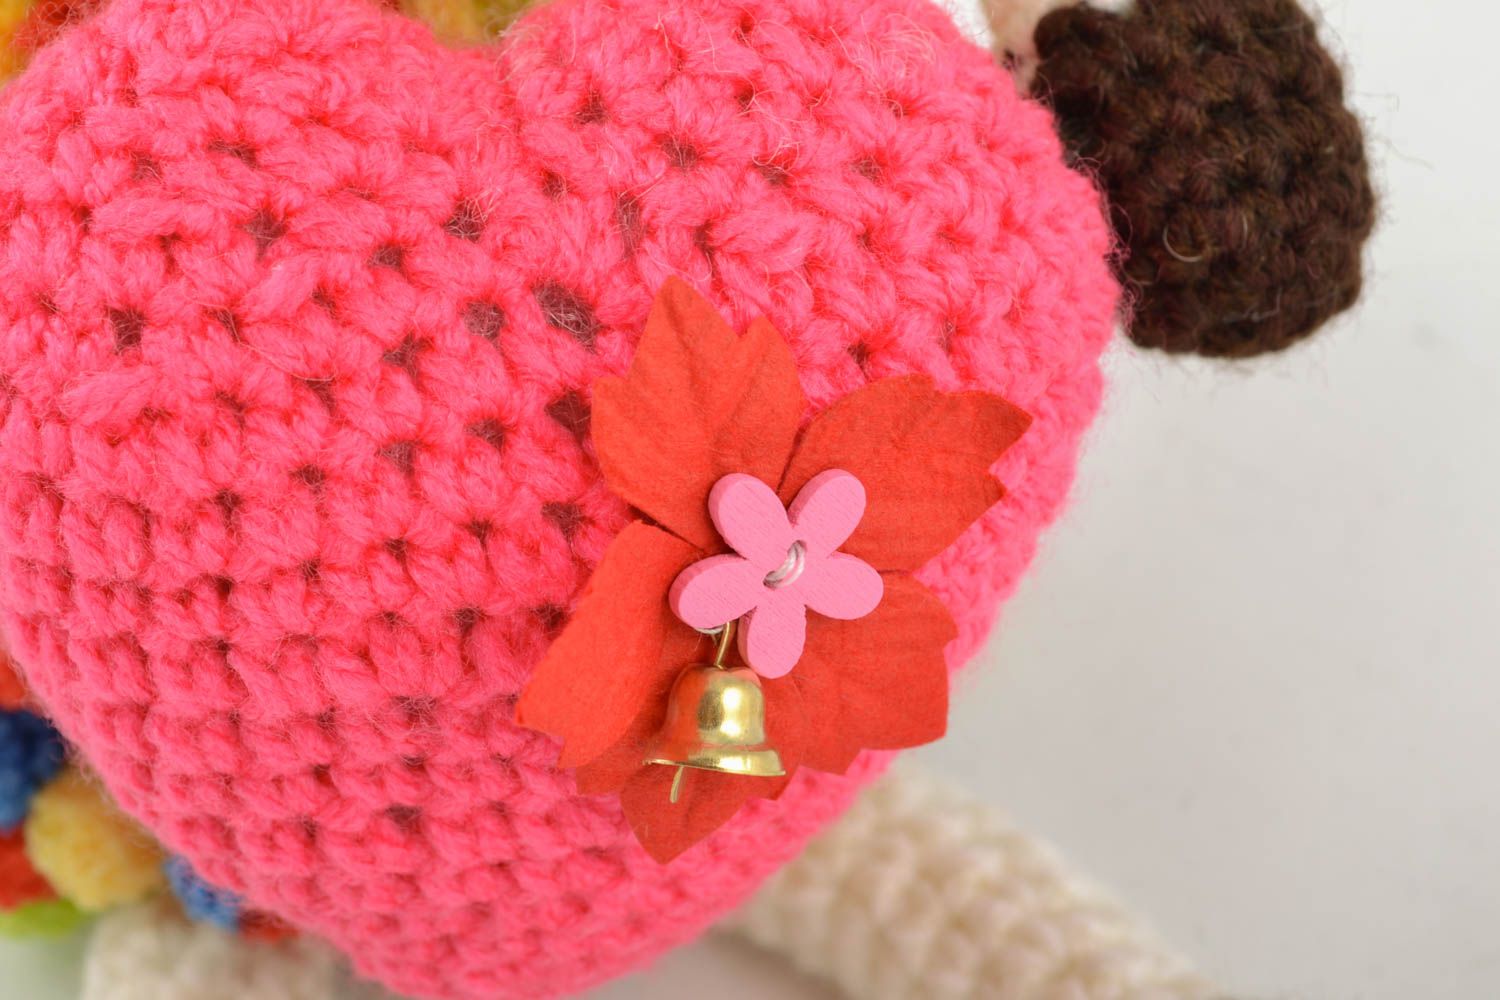 Soft crochet toy Sheep with Heart photo 3